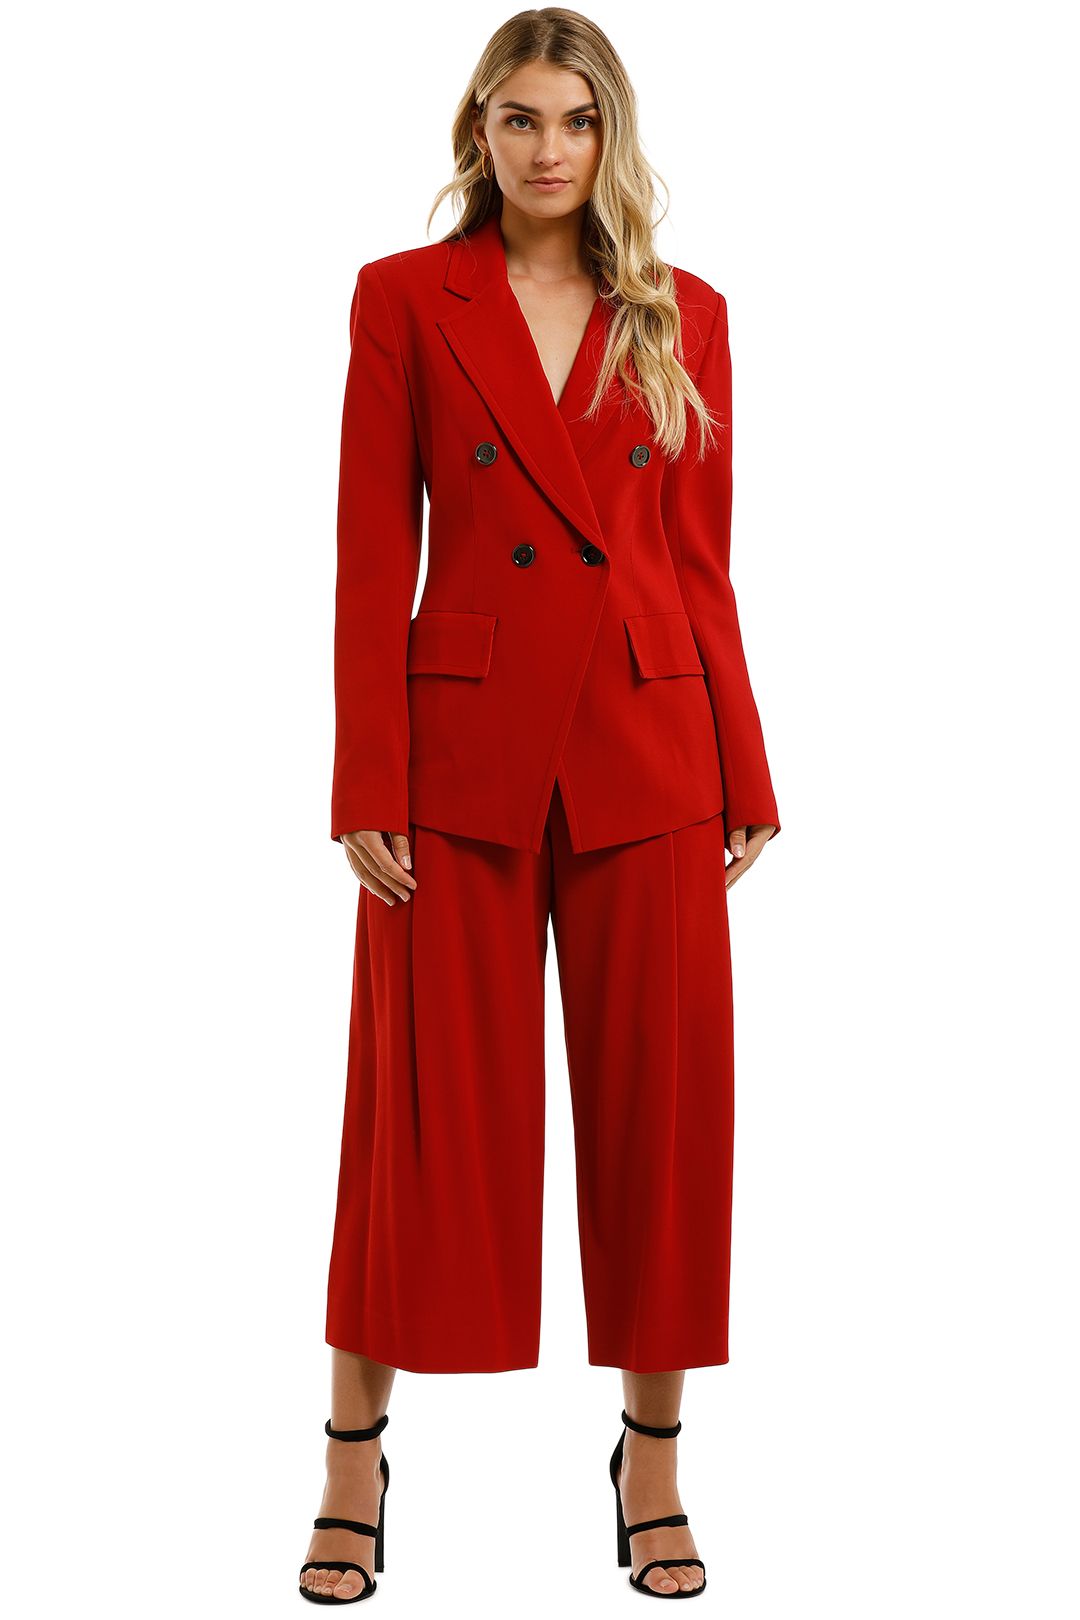 Ginger-and-Smart-Equinox-Jacket-and-Pant-Set-Scarlet-Red-Front